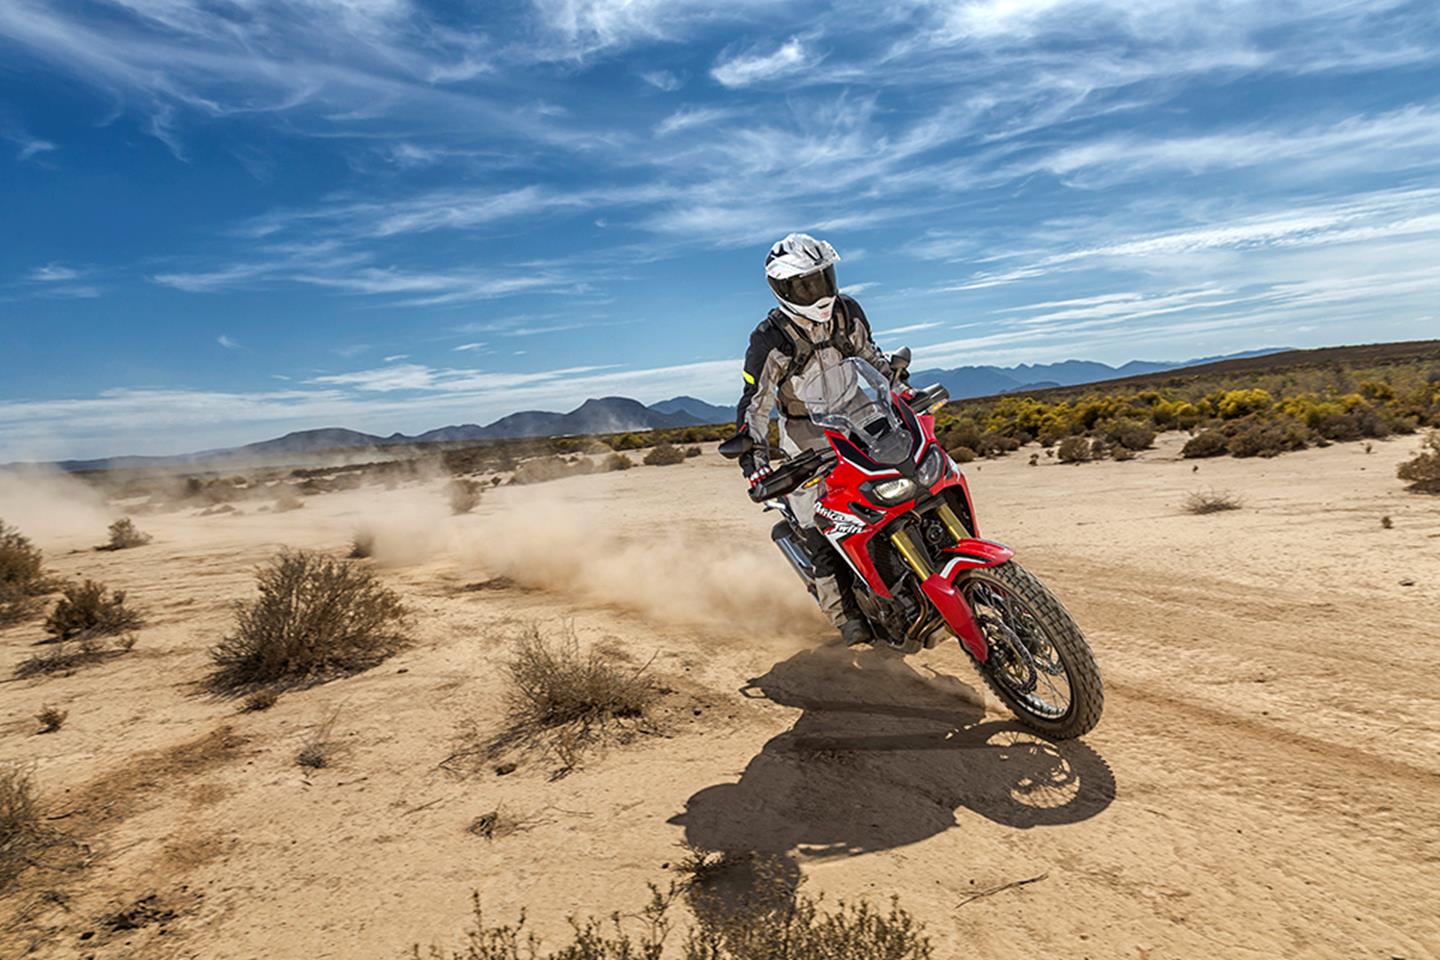 HONDA CRF1000L AFRICA TWIN (2016-2019) Motorcycle Review